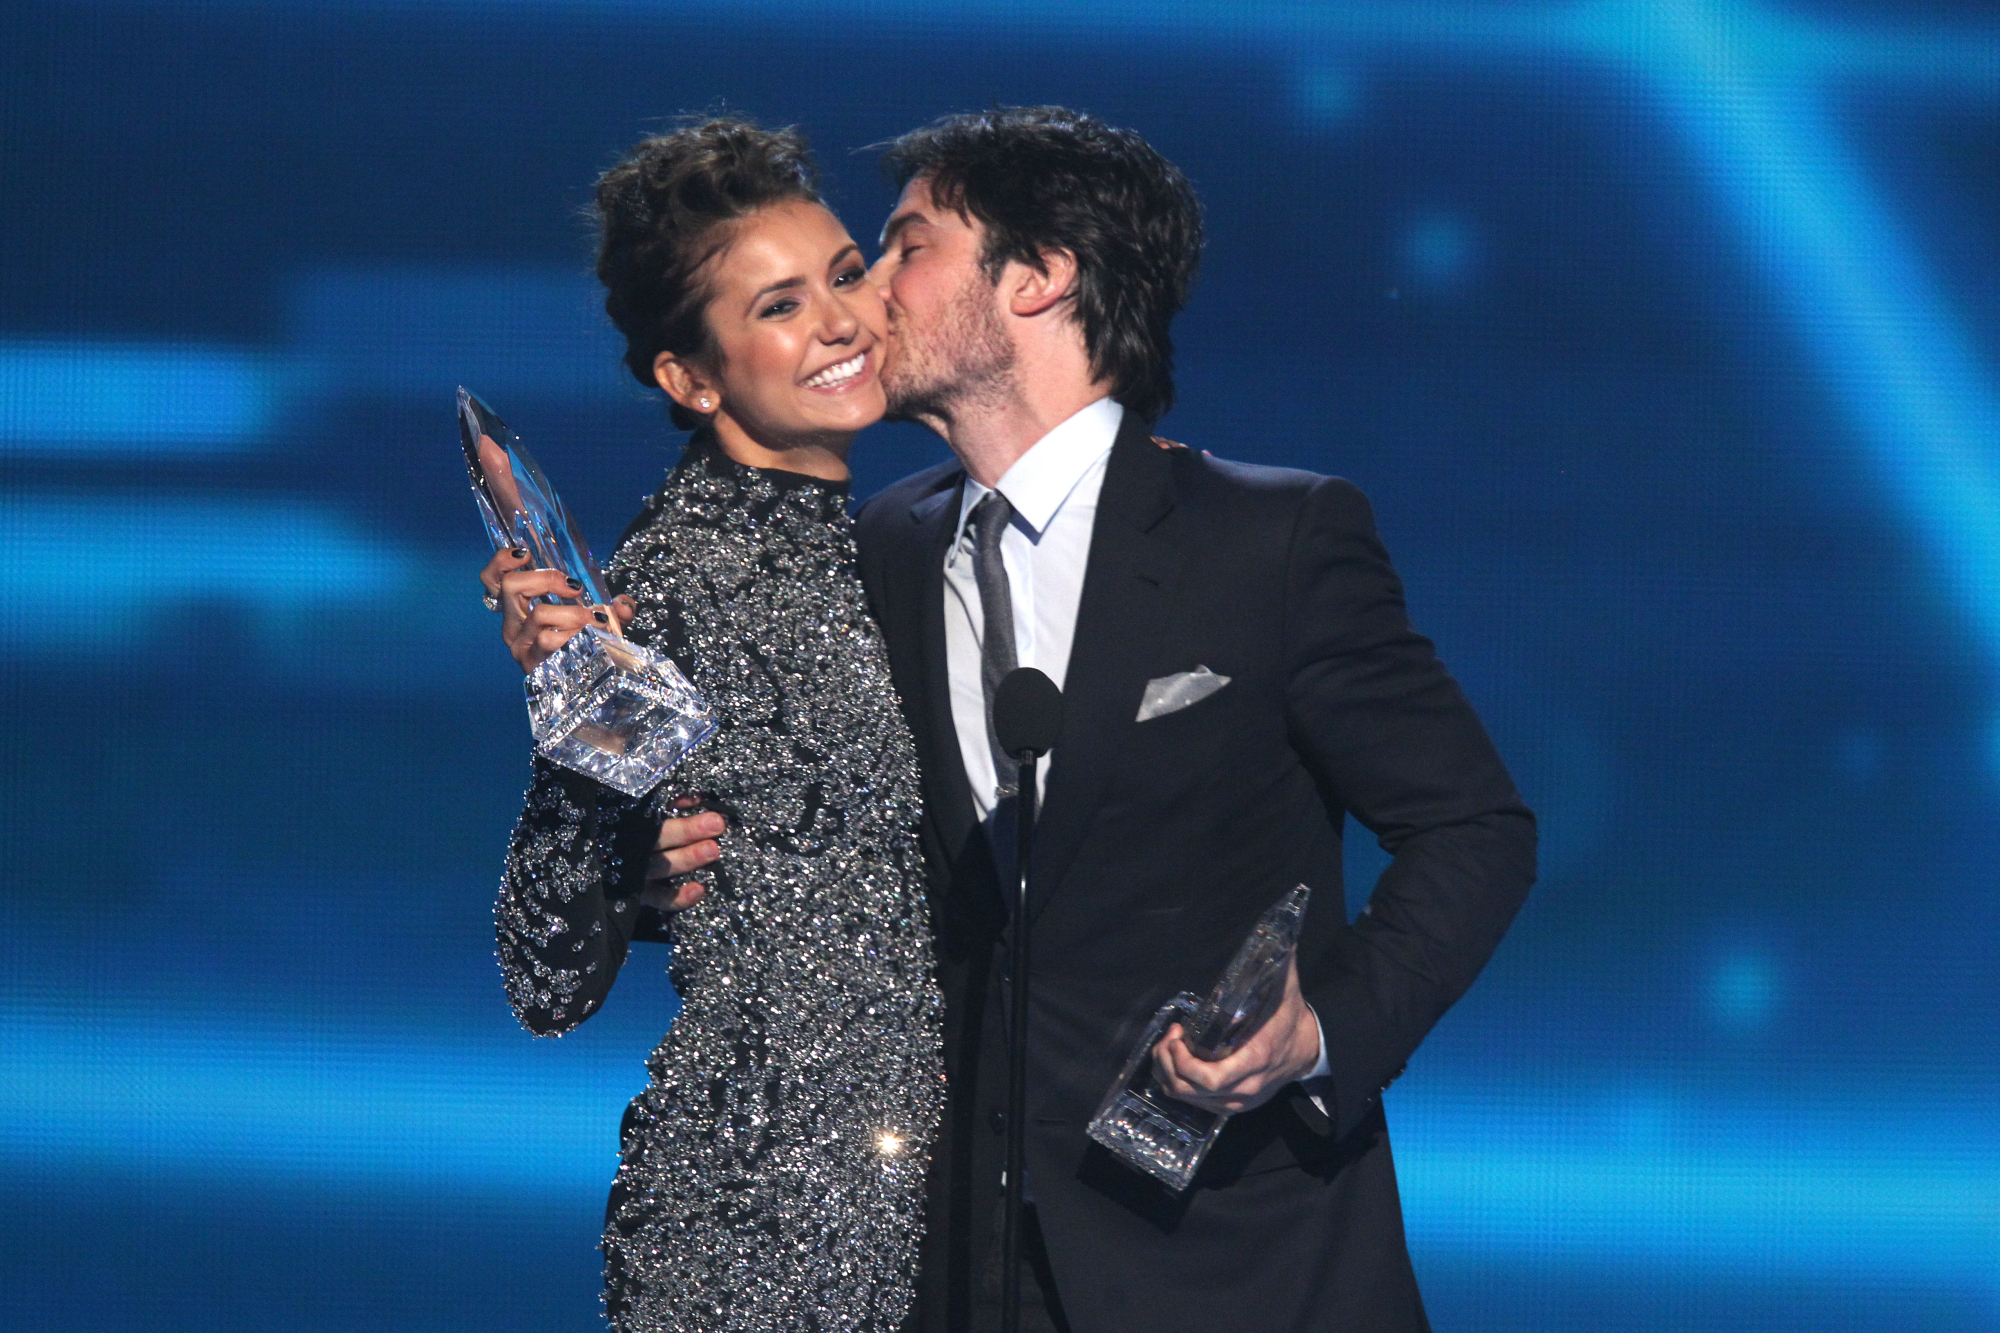 Nina Dobrev and Ian Somerhalder, who played Elena and Damon in 'The Vampire Diaries' and whose characters' daughter would have appeared in 'Legacies' Season 5, accept an award onstage. Somerhalder, who is kissing Dobrev's cheek, wears a black suit over a white button-up shirt and gray tie. Dobrev wears a black long-sleeved dress covered in sparkly jewels.